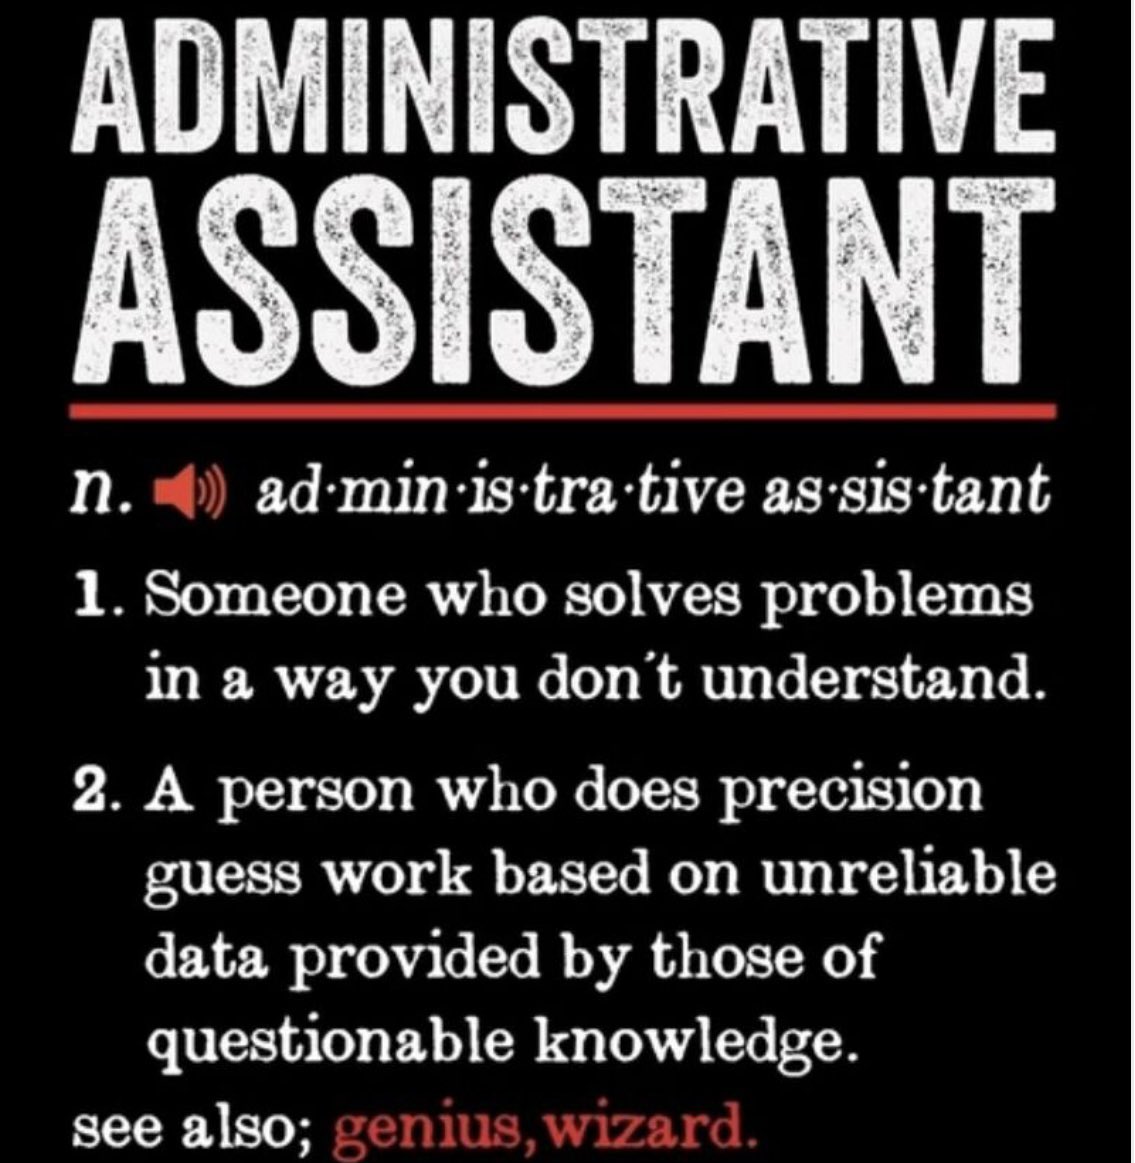 Yesterday was Administrative Professionals Day. Please join us in thanking our amazing office team, Ms. Sandra, Ms. Linda, Mrs. Erica, Mrs. Amanda & Ms. Chrystal. They assist in ‘coordinating the chaos’ & their contribution to NEE is tremendous. 😊 Thank you for all you do!